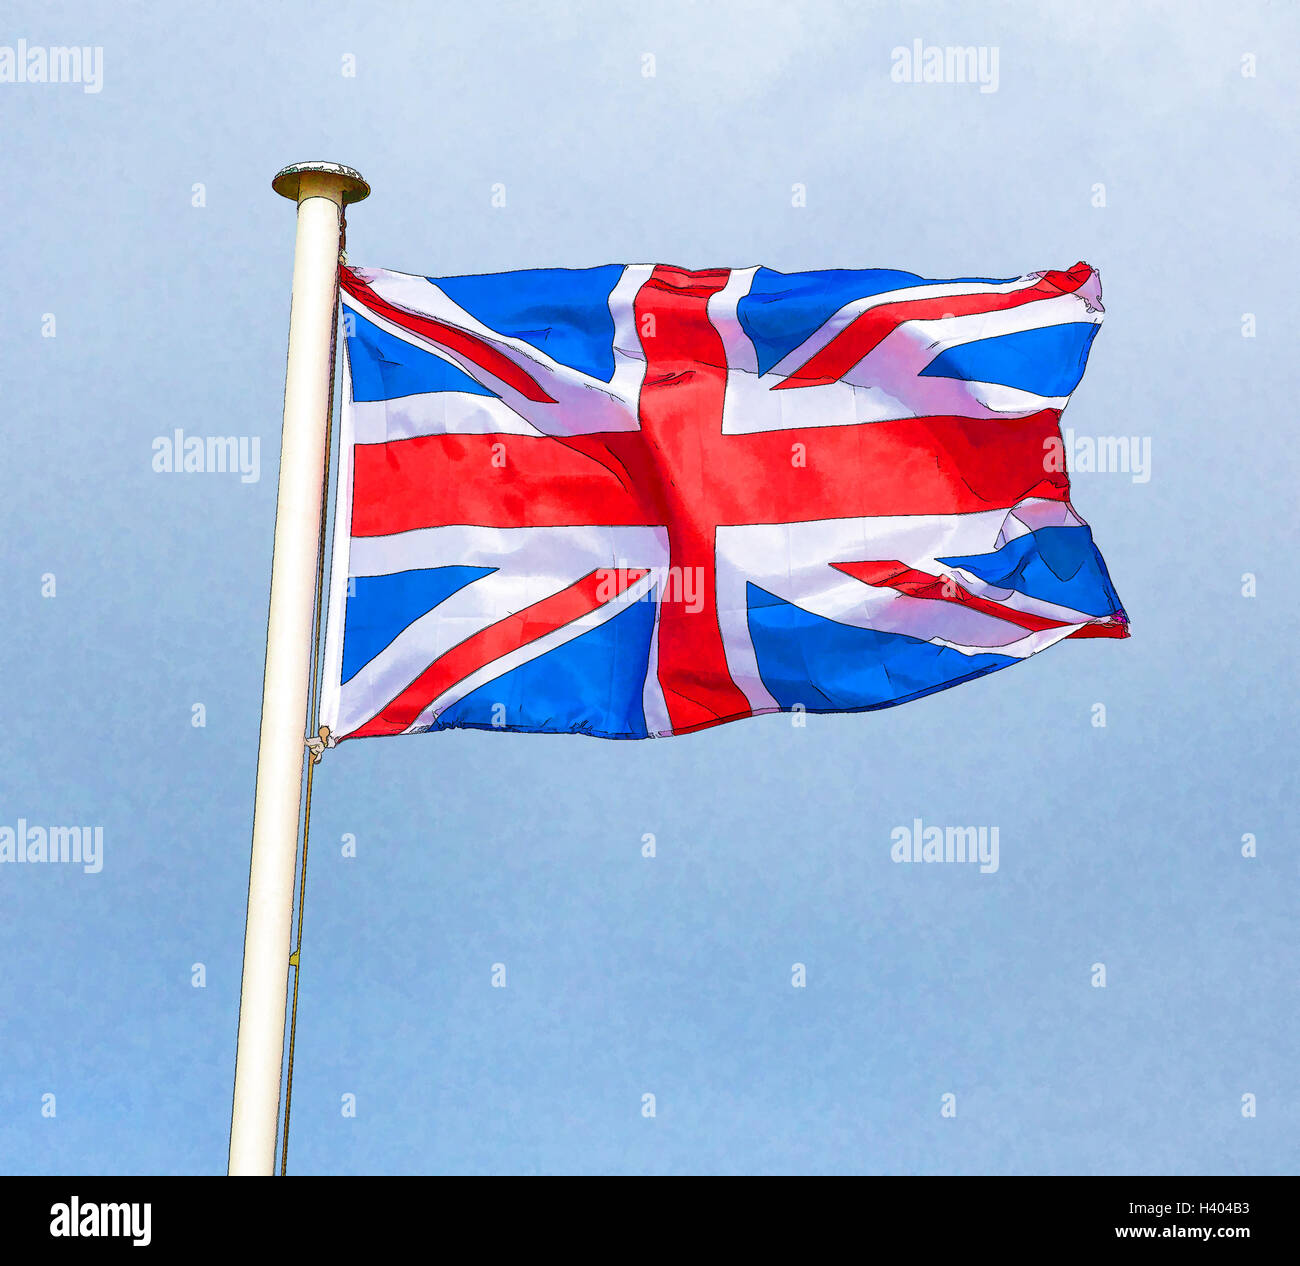 Union jack flag of Great Britain fluttering in the wind with bright colours illustration like cartoon effect Stock Photo